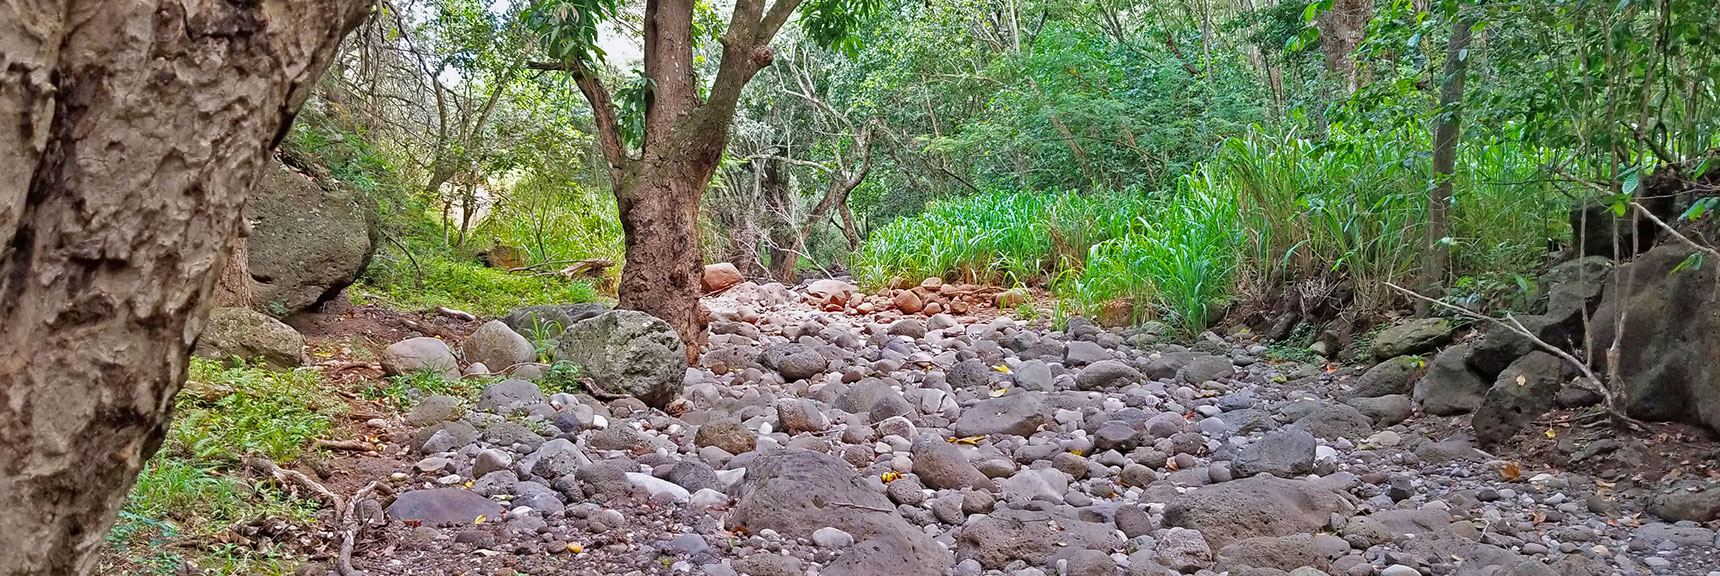 The Surface Along the Route Would Be Pretty Rugged | Hidden Hills and Jungle Above Kahana in West Maui, Hawaii